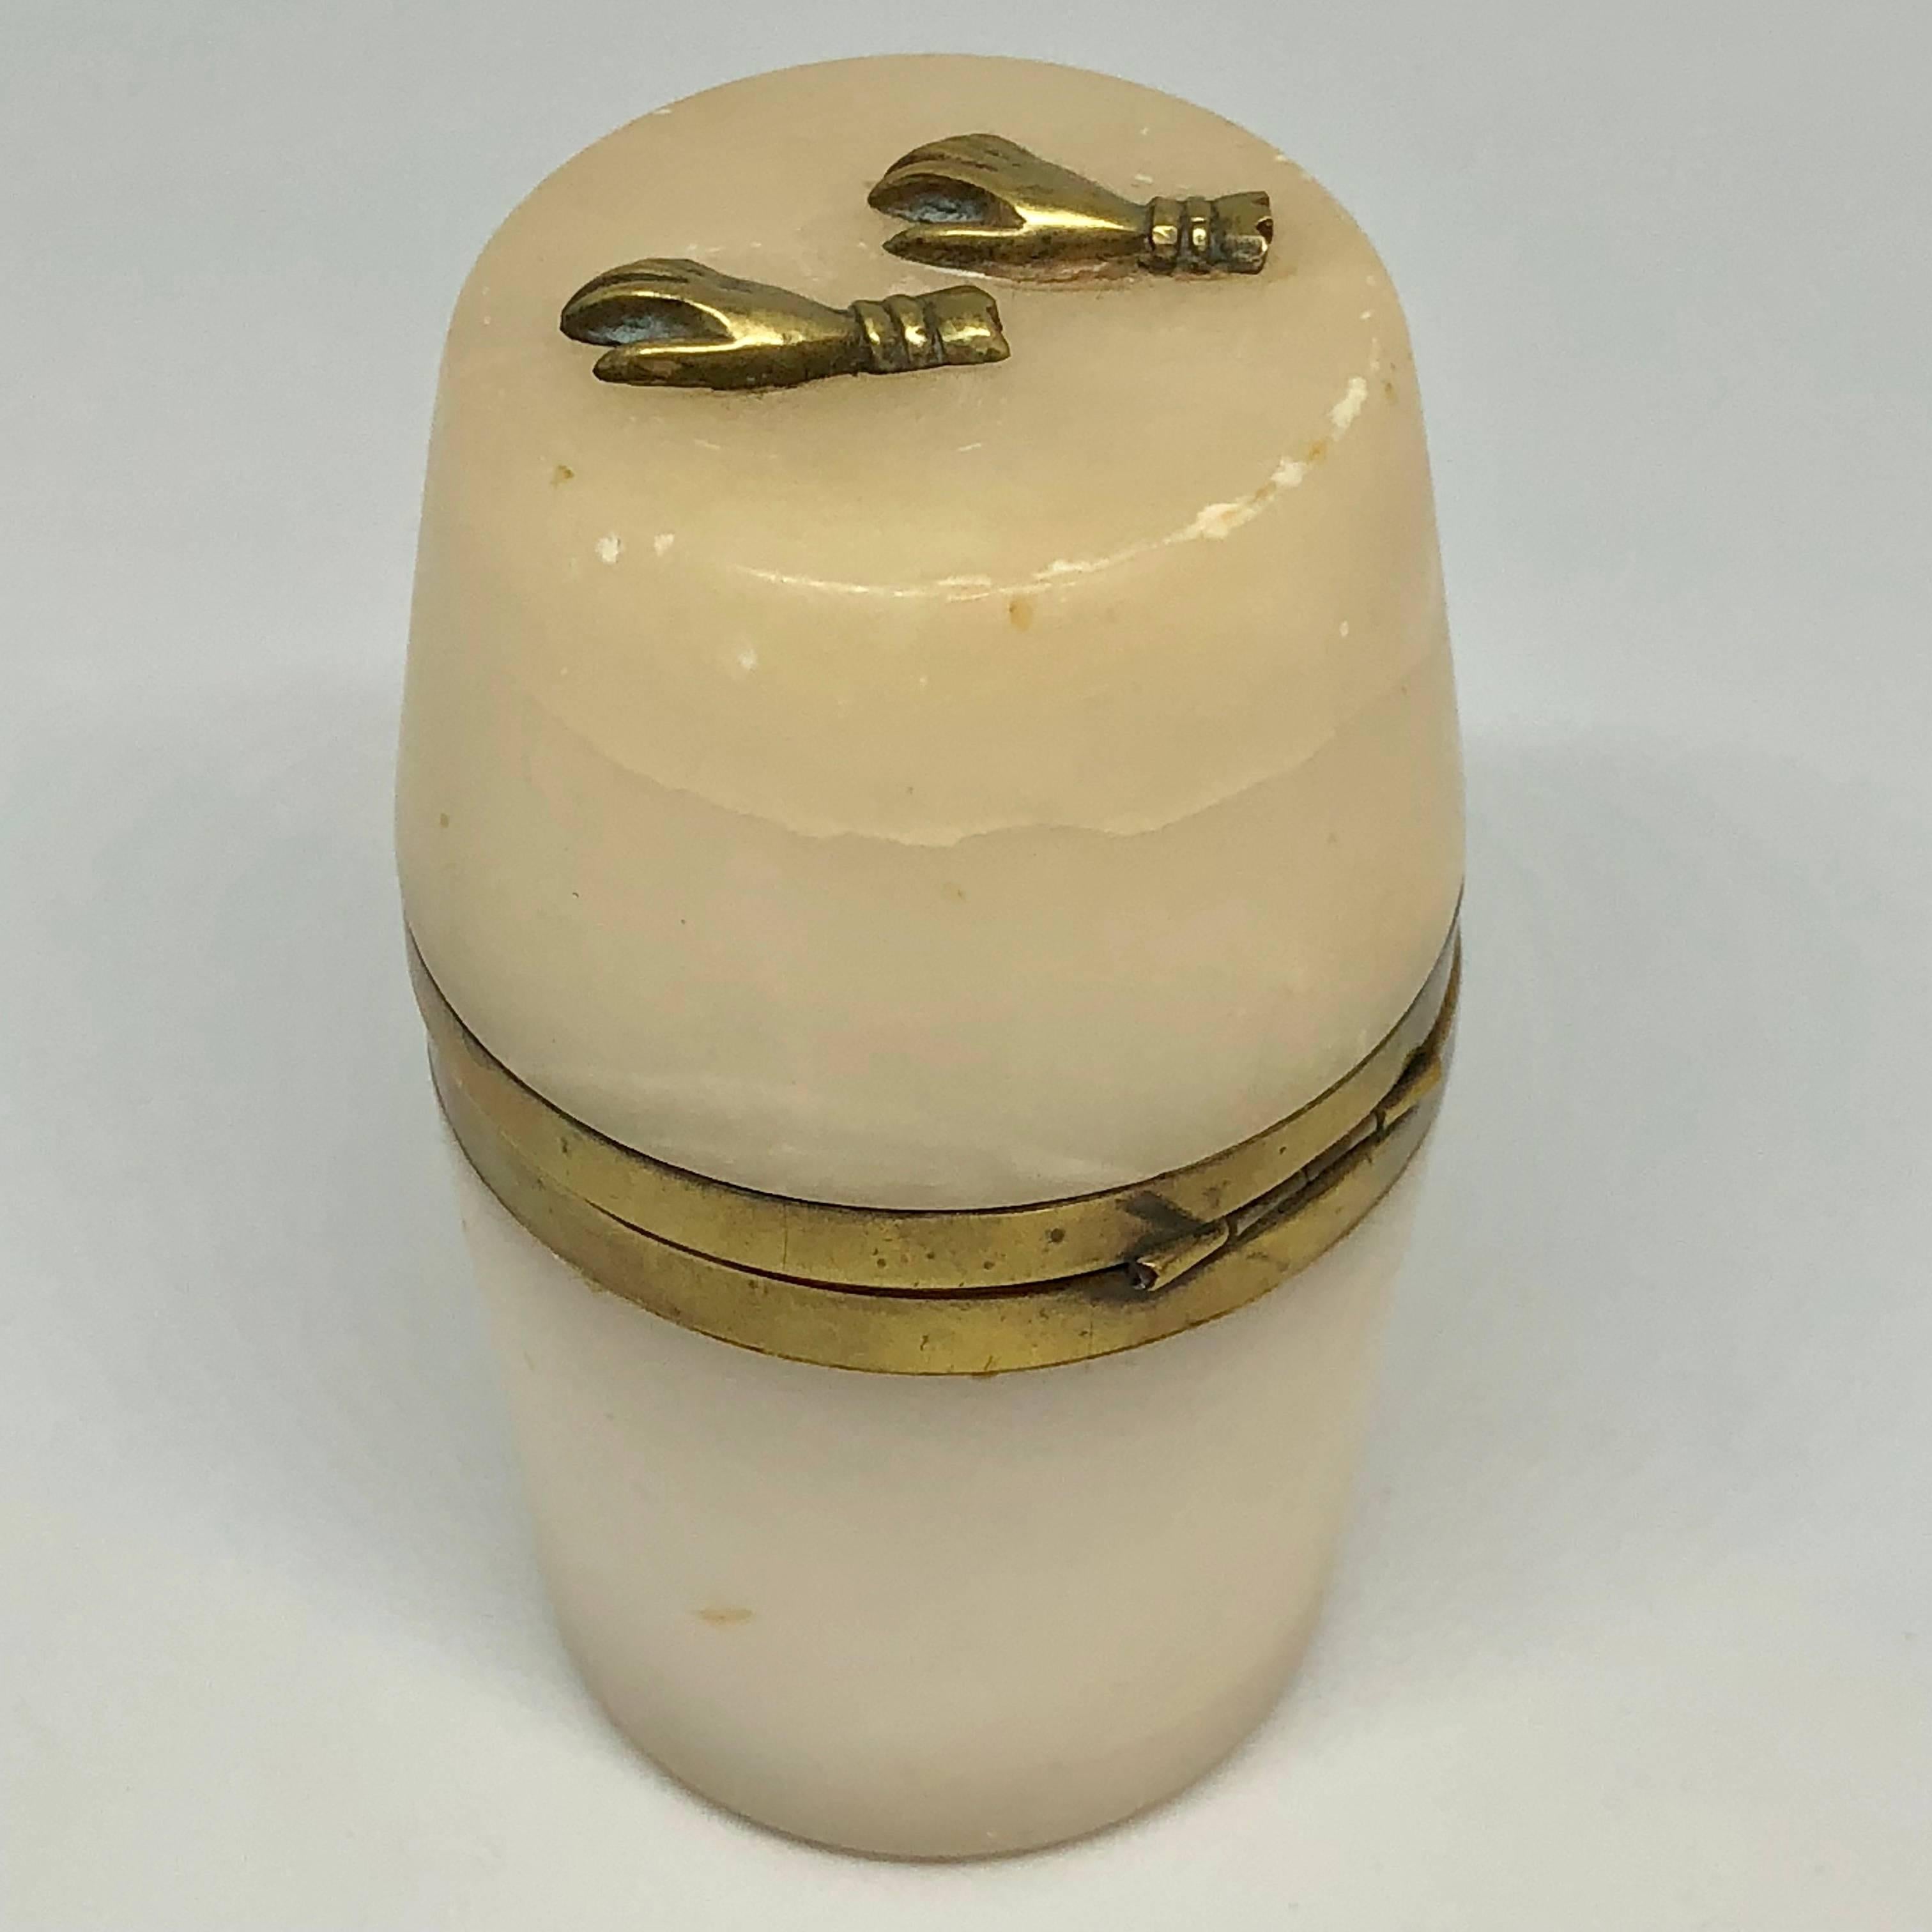 Hand-Crafted Small 18th Century Alabaster Barrel Shaped Jewelry Box W/ Brass Hands Decor For Sale